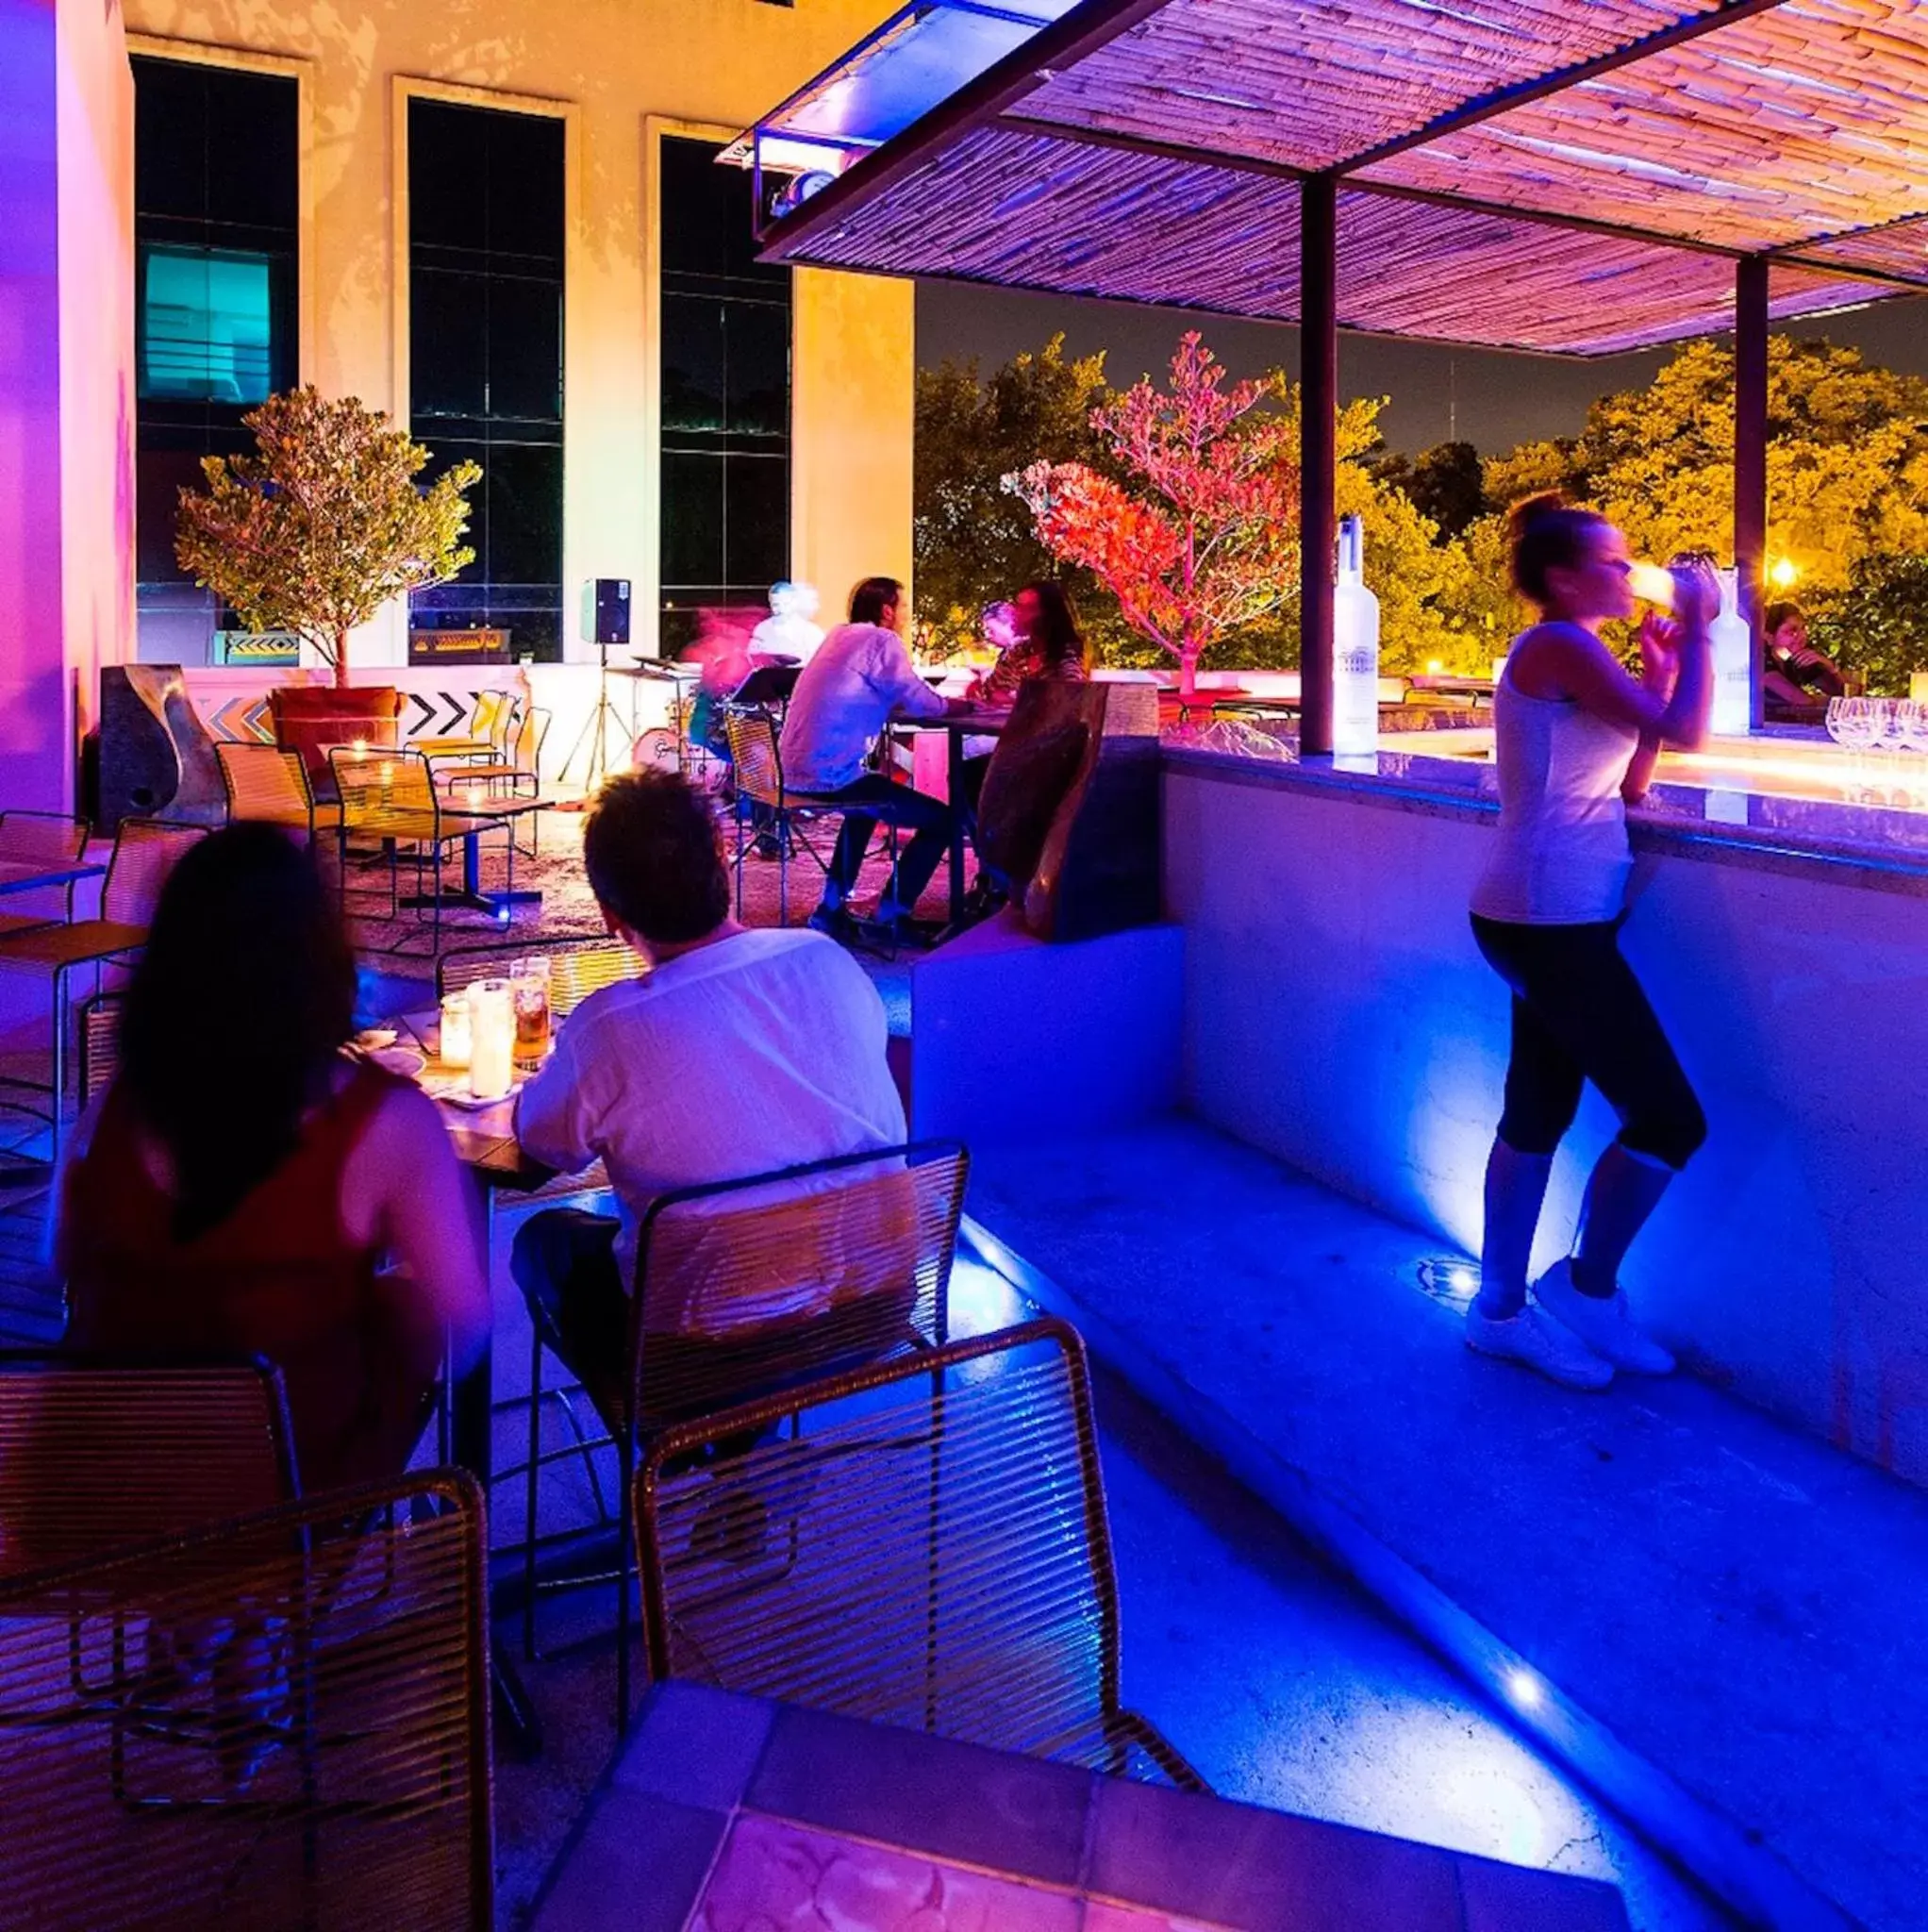 Balcony/Terrace in Rosas & Xocolate Boutique Hotel and Spa Merida, a Member of Design Hotels